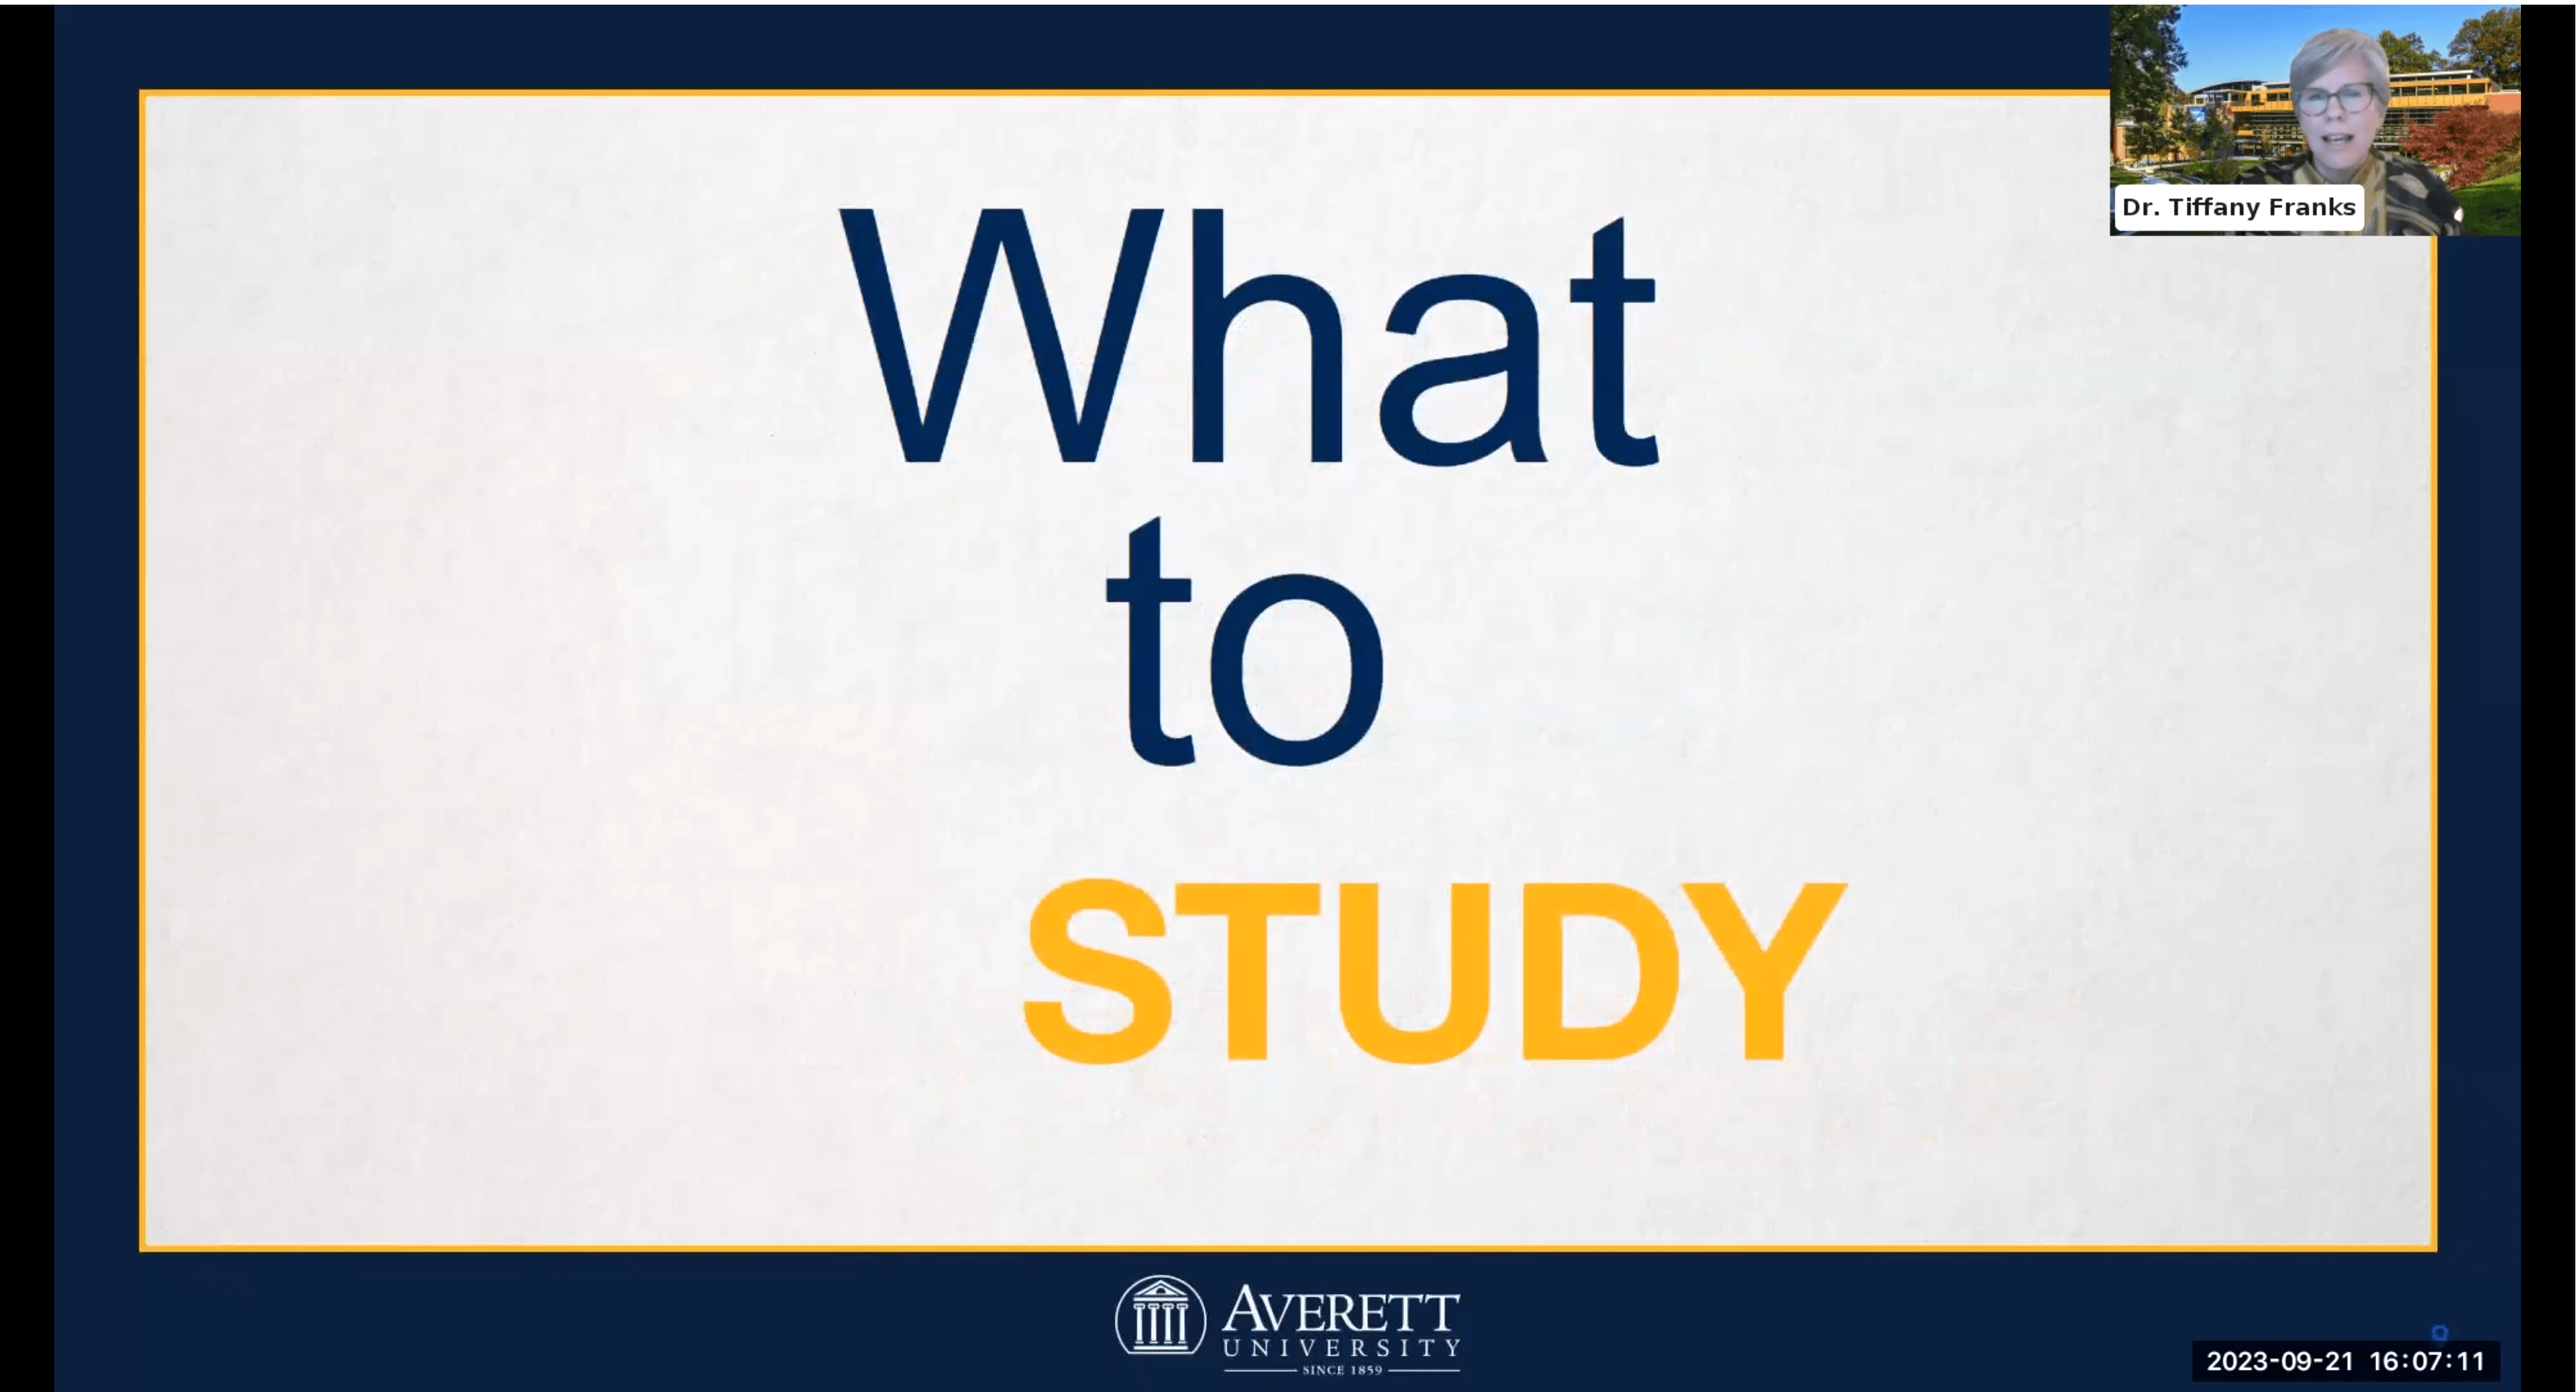 Identify your preferred study subject based on your interests and excitement in class.